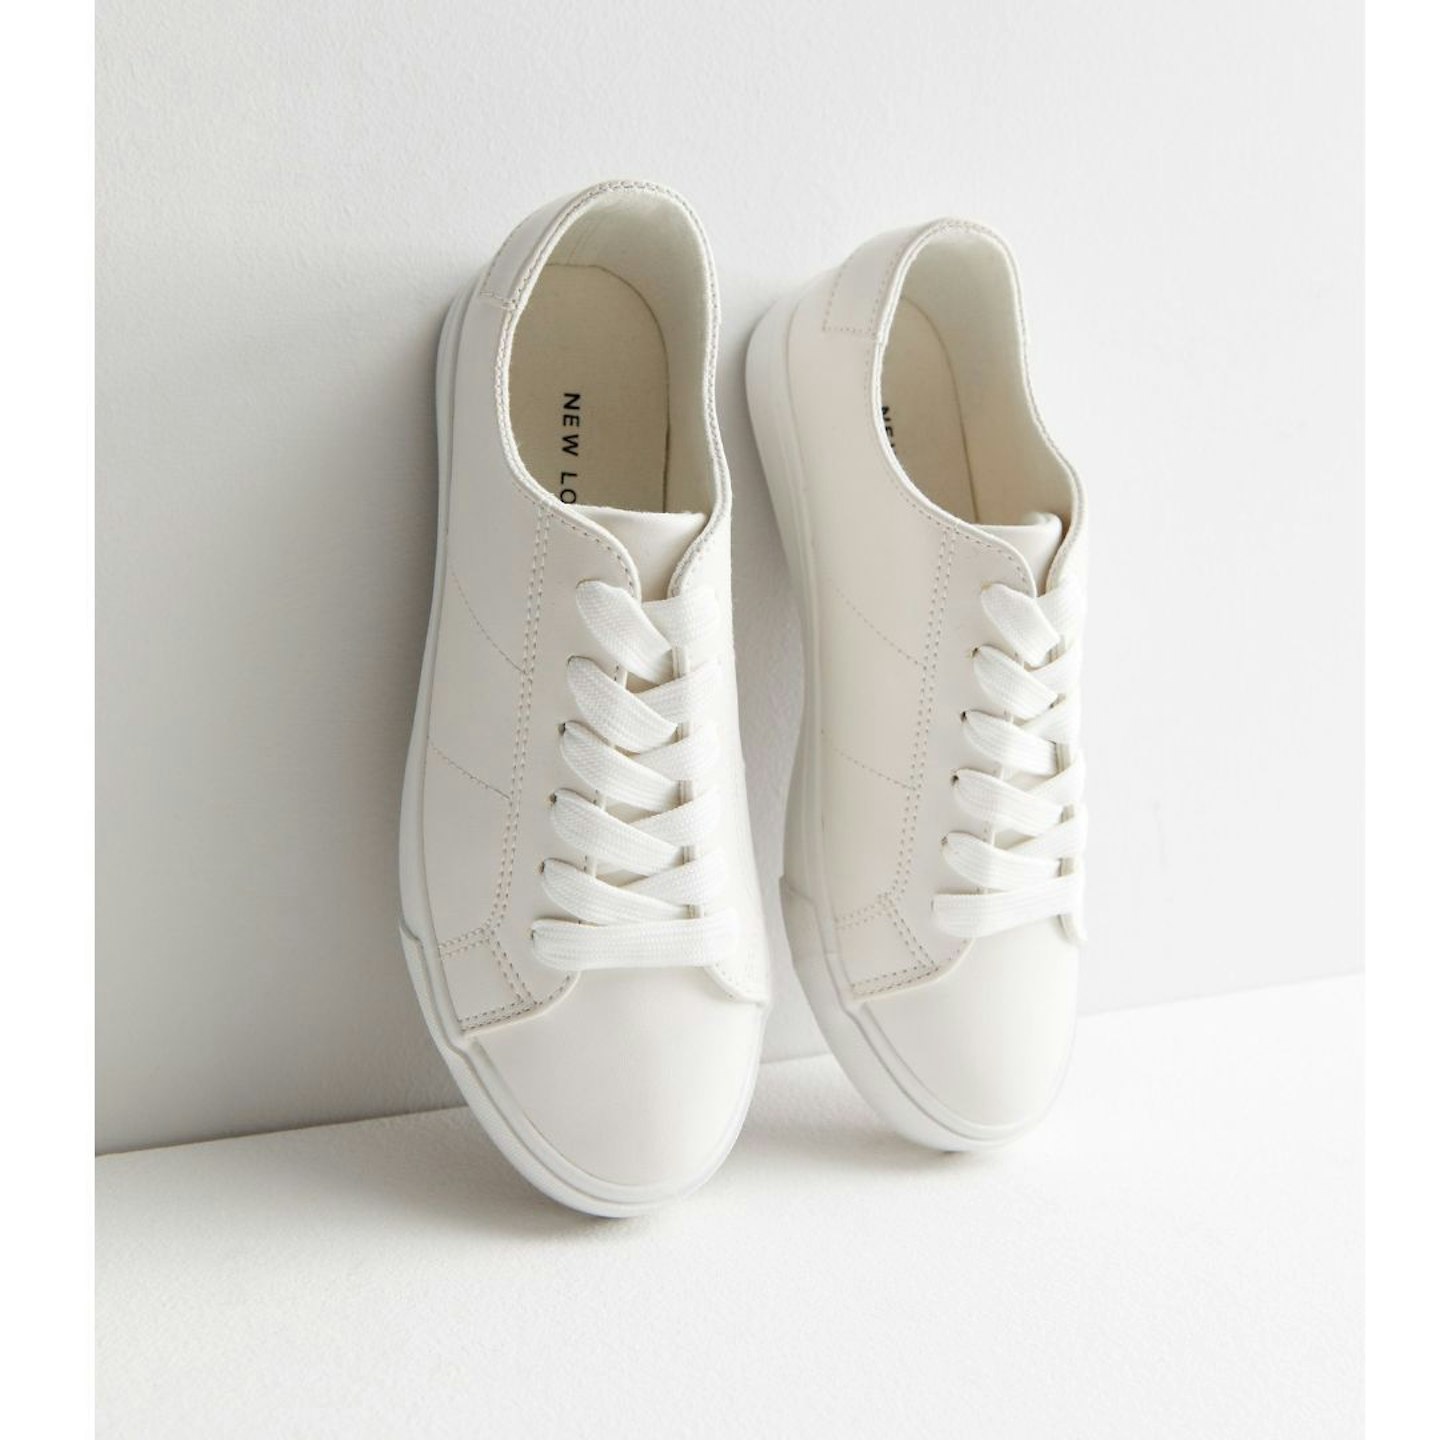 New Look White Leather-Look Lace Up Trainers